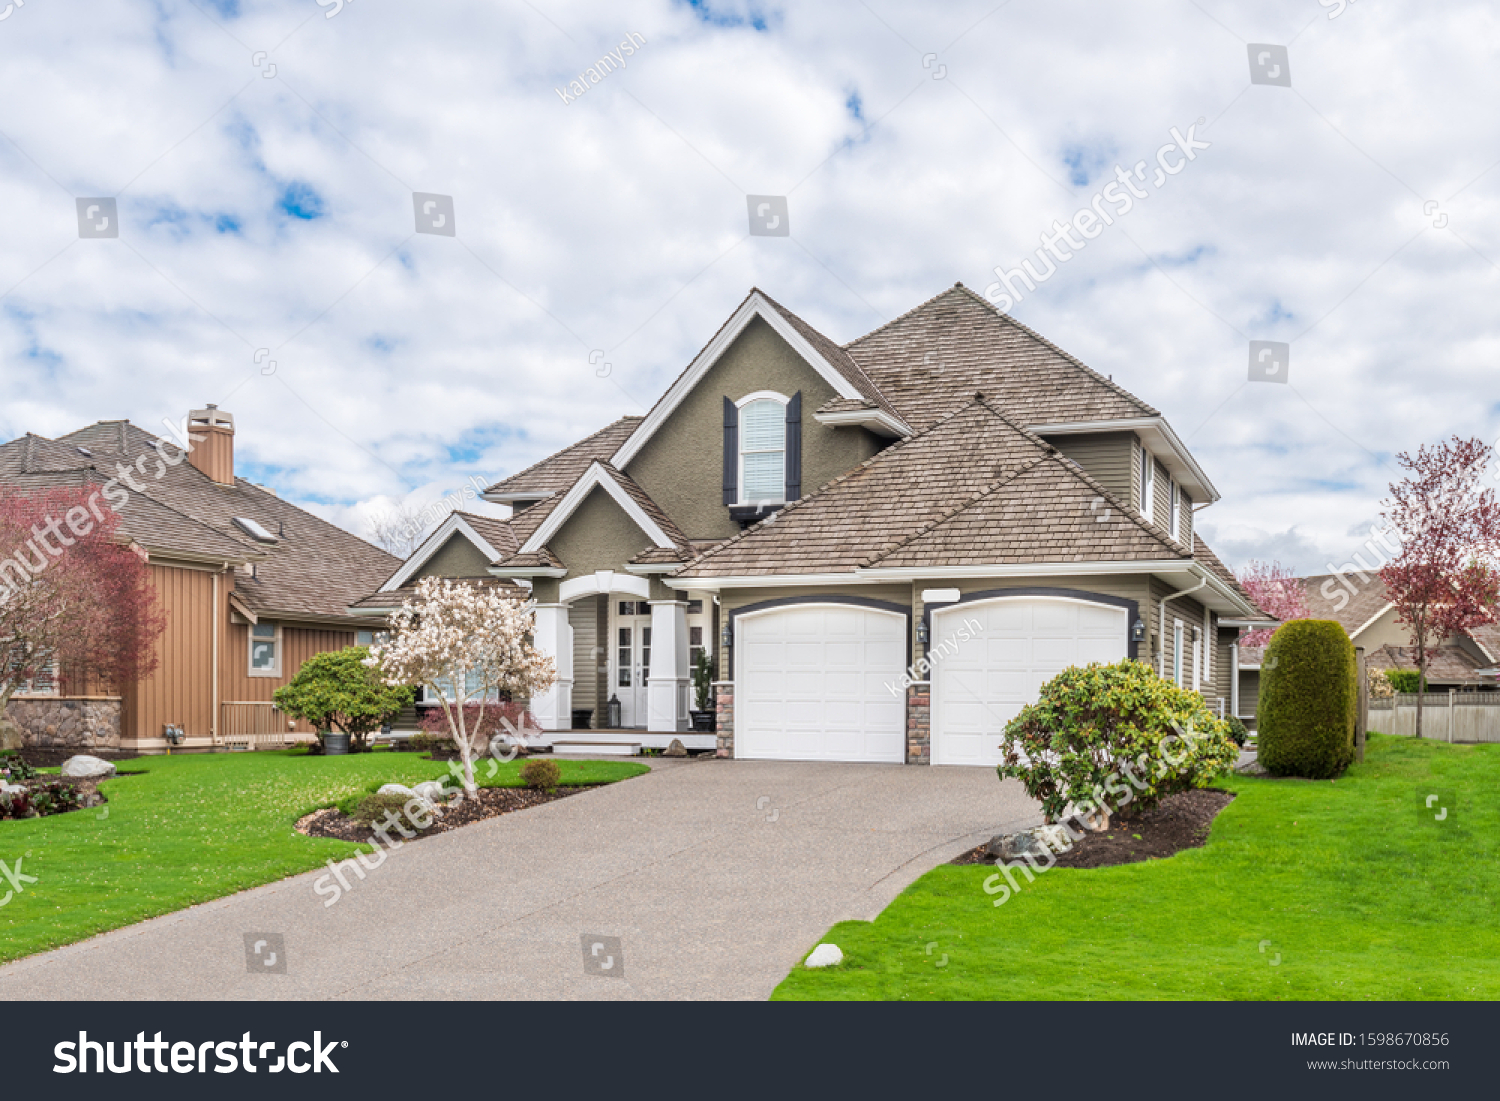 A perfect neighbourhood. Houses in suburb at Summer in the north America. Luxury houses with nice landscape. #1598670856